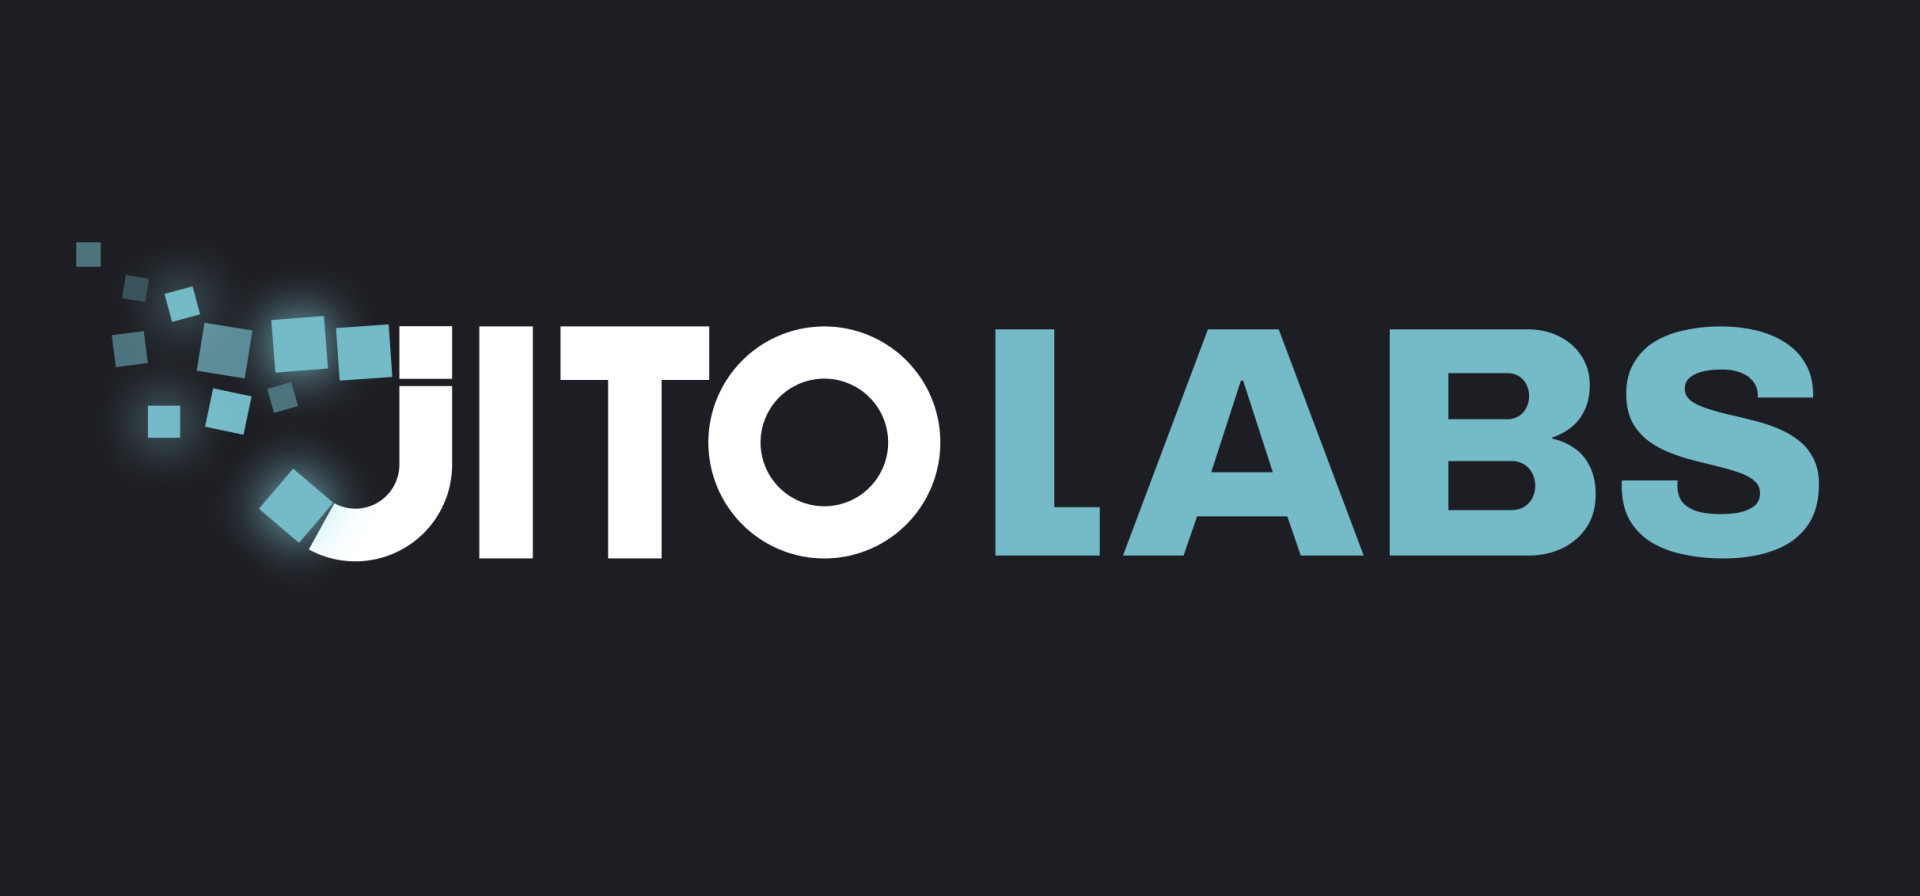 MEV Infrastructure Company Jito Labs Completes $10 Million Series A